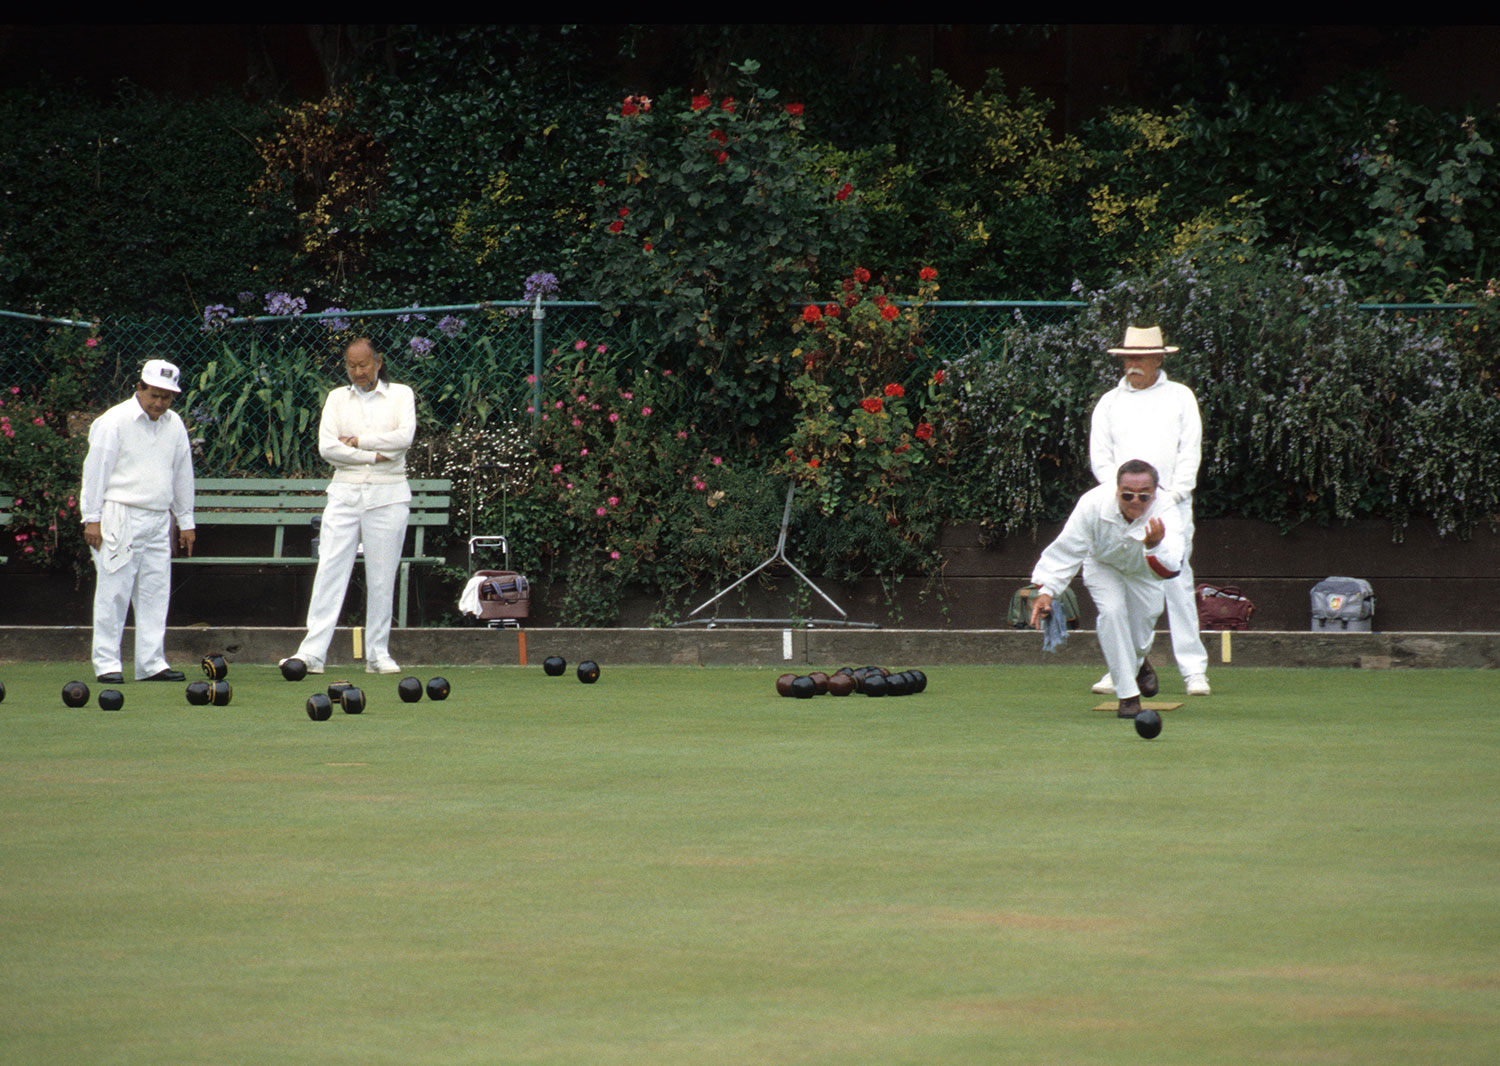 Lawn Bowlers in Golden Gate Park 1999